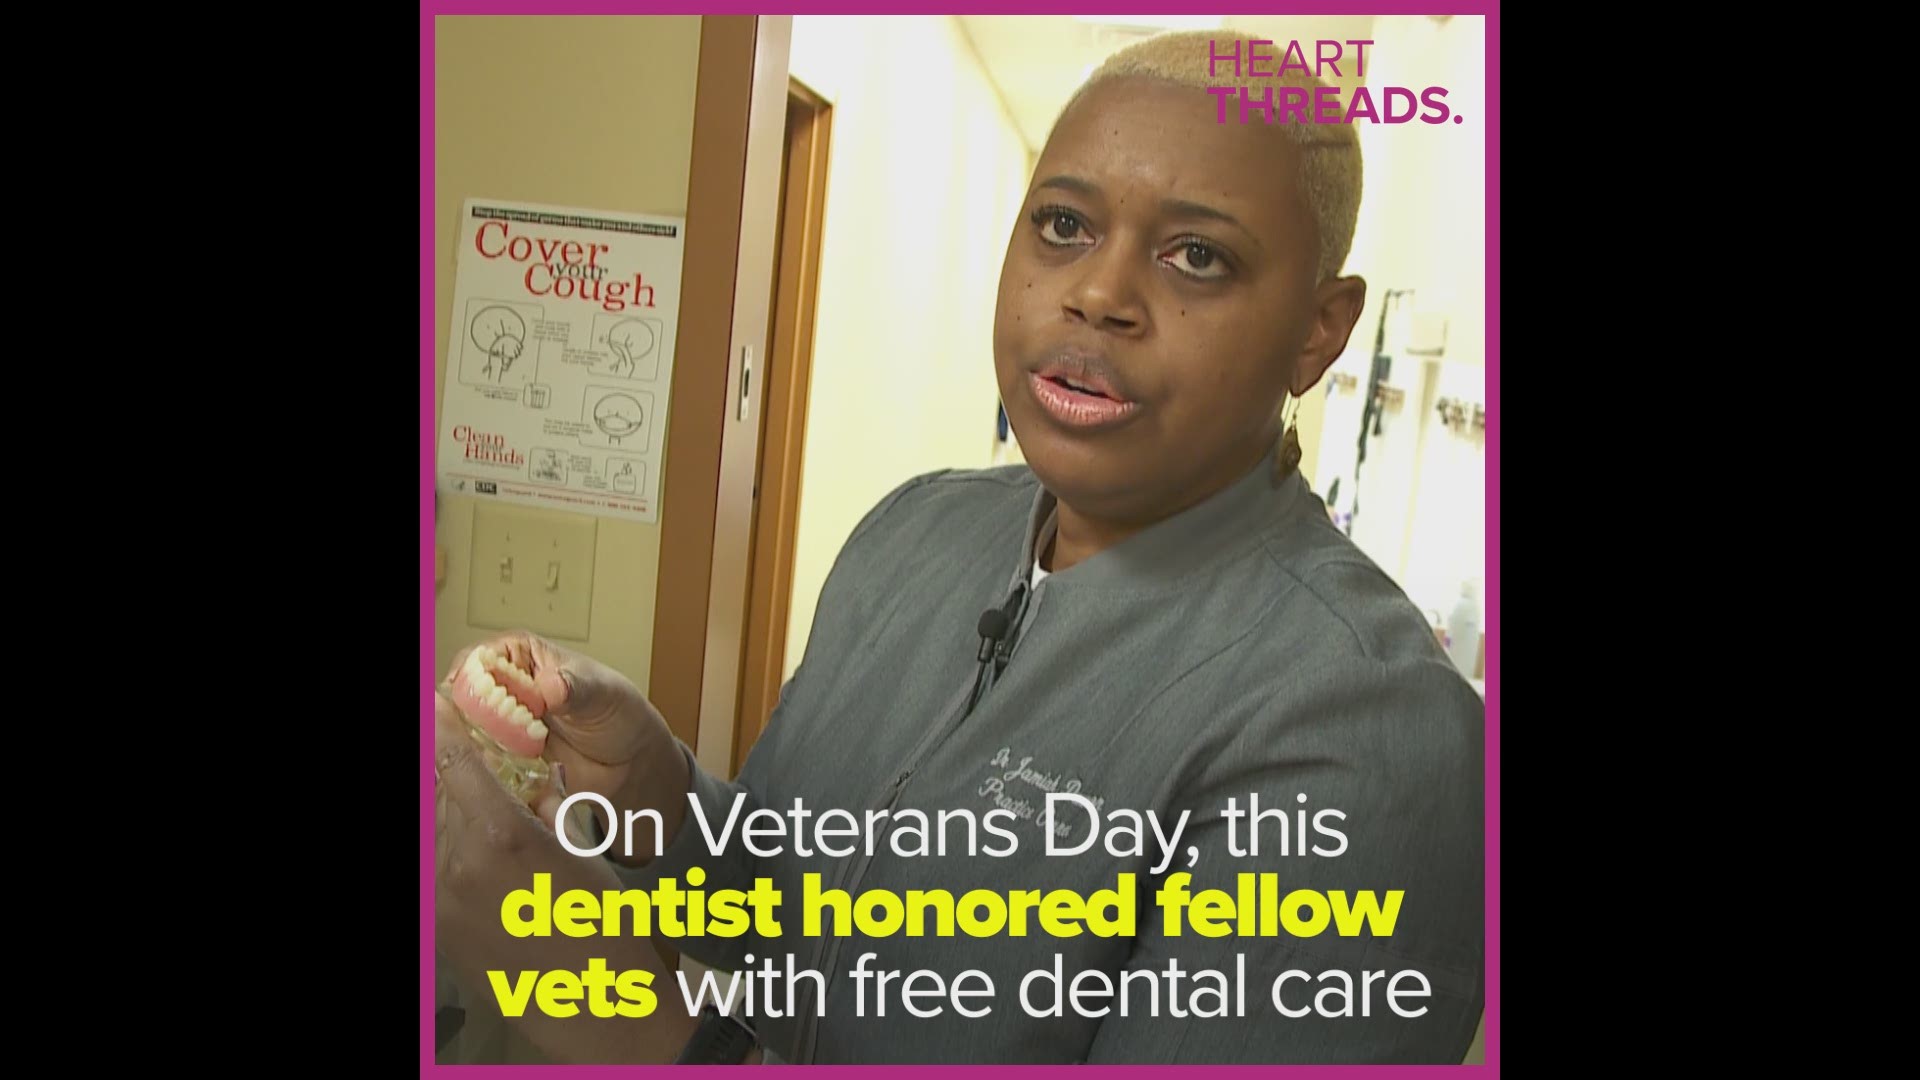 This dentist honors her fellow veterans with free services on Veterans Day.